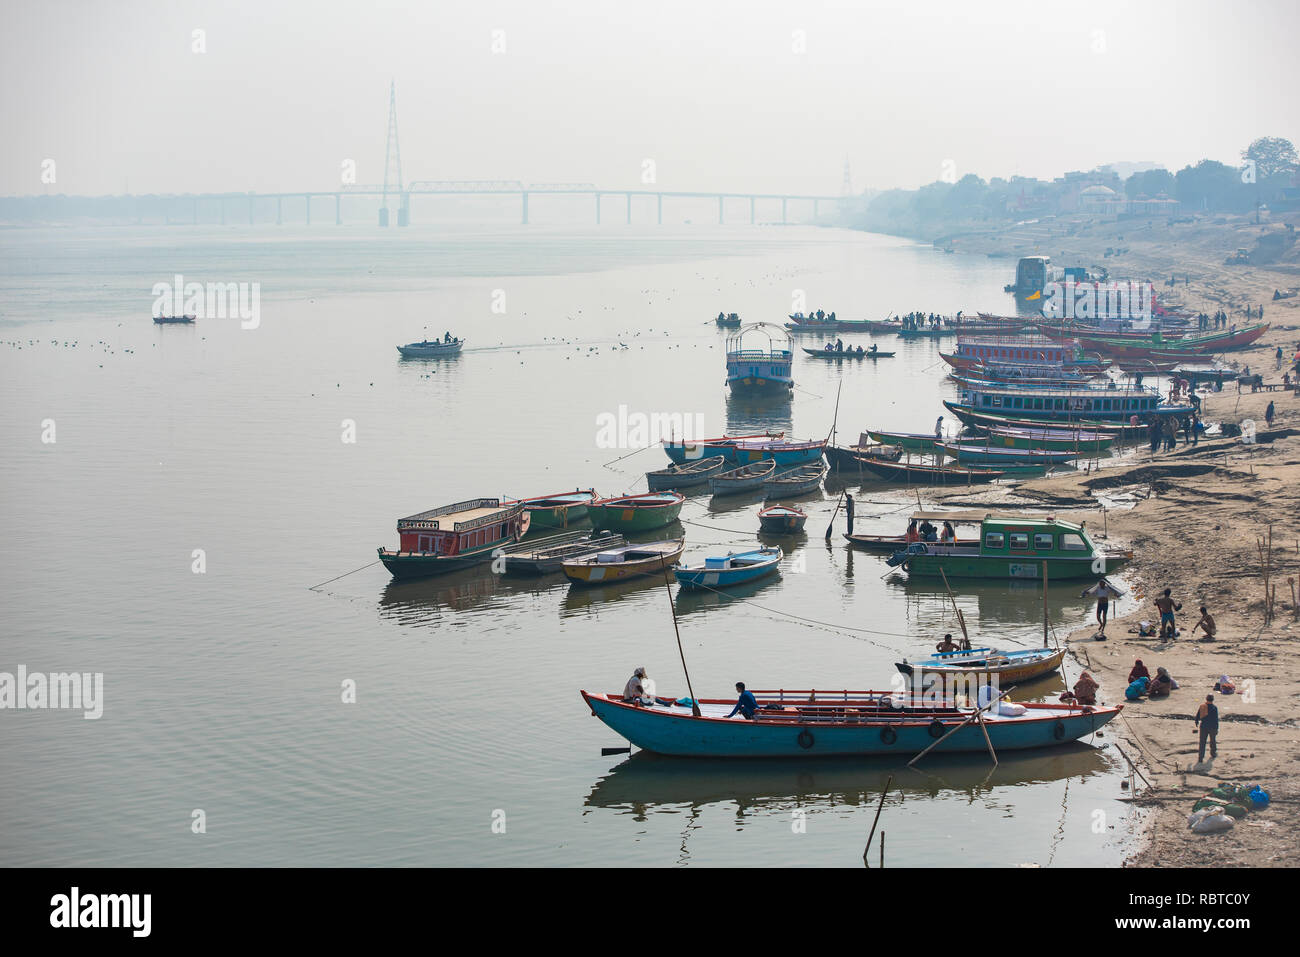 A landscape shot across the Ganges in Varanasi looking south from Assi Ghat with Ramnagar Bridge in the background and boats in the foreground. Stock Photo